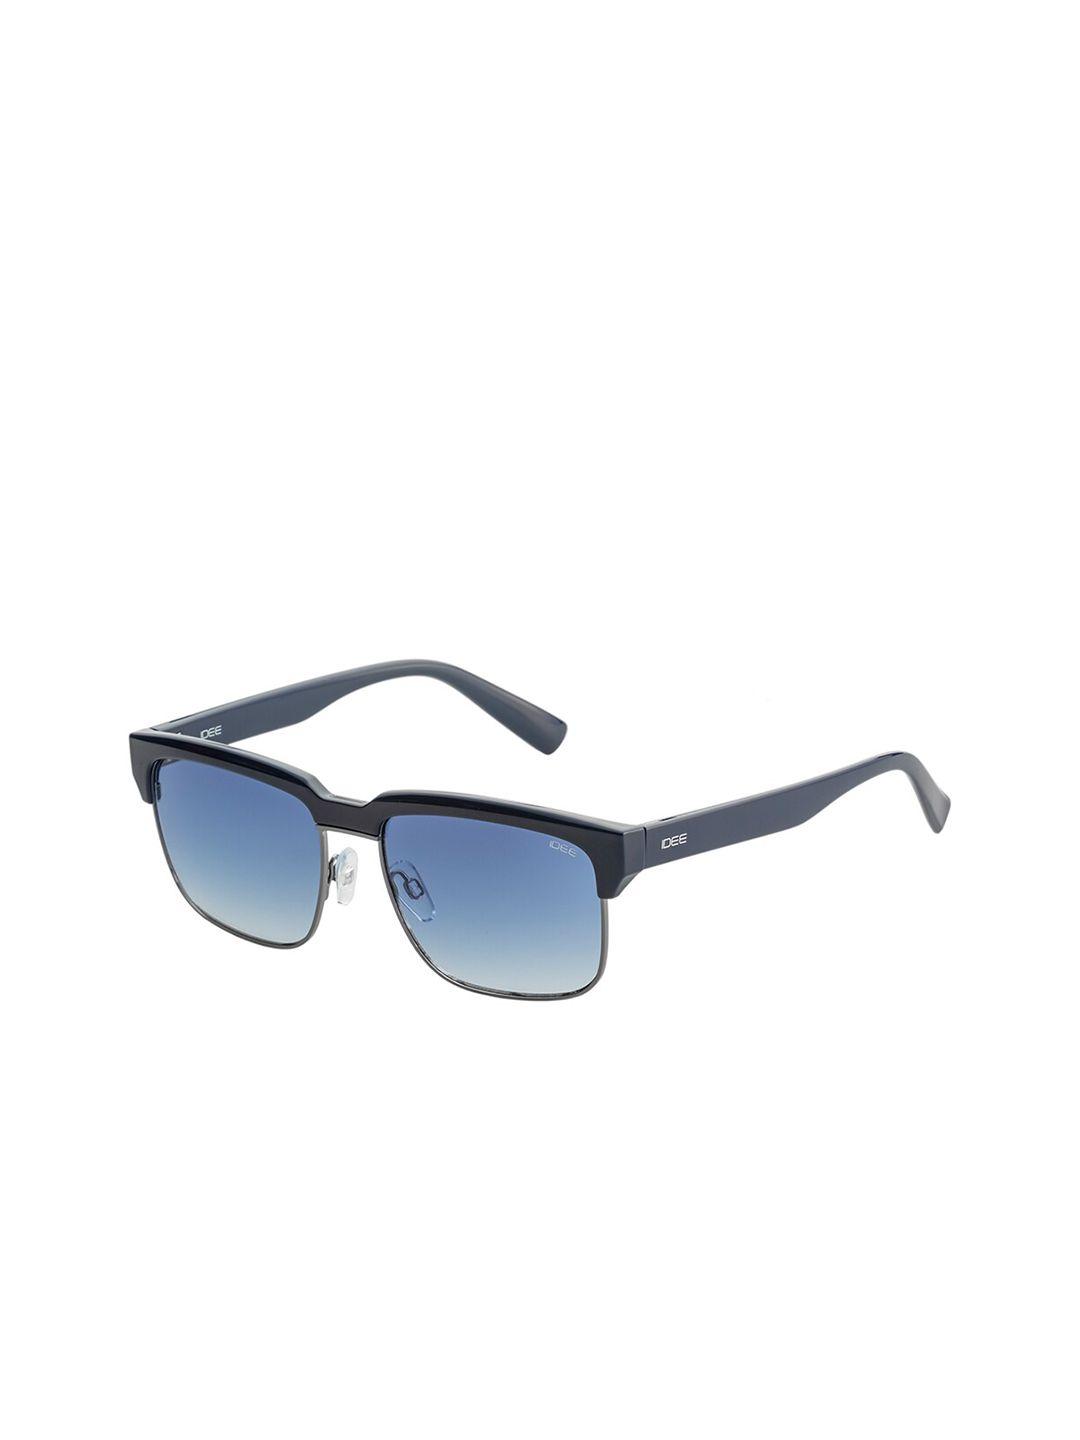 idee men lens & other sunglasses with uv protected lens